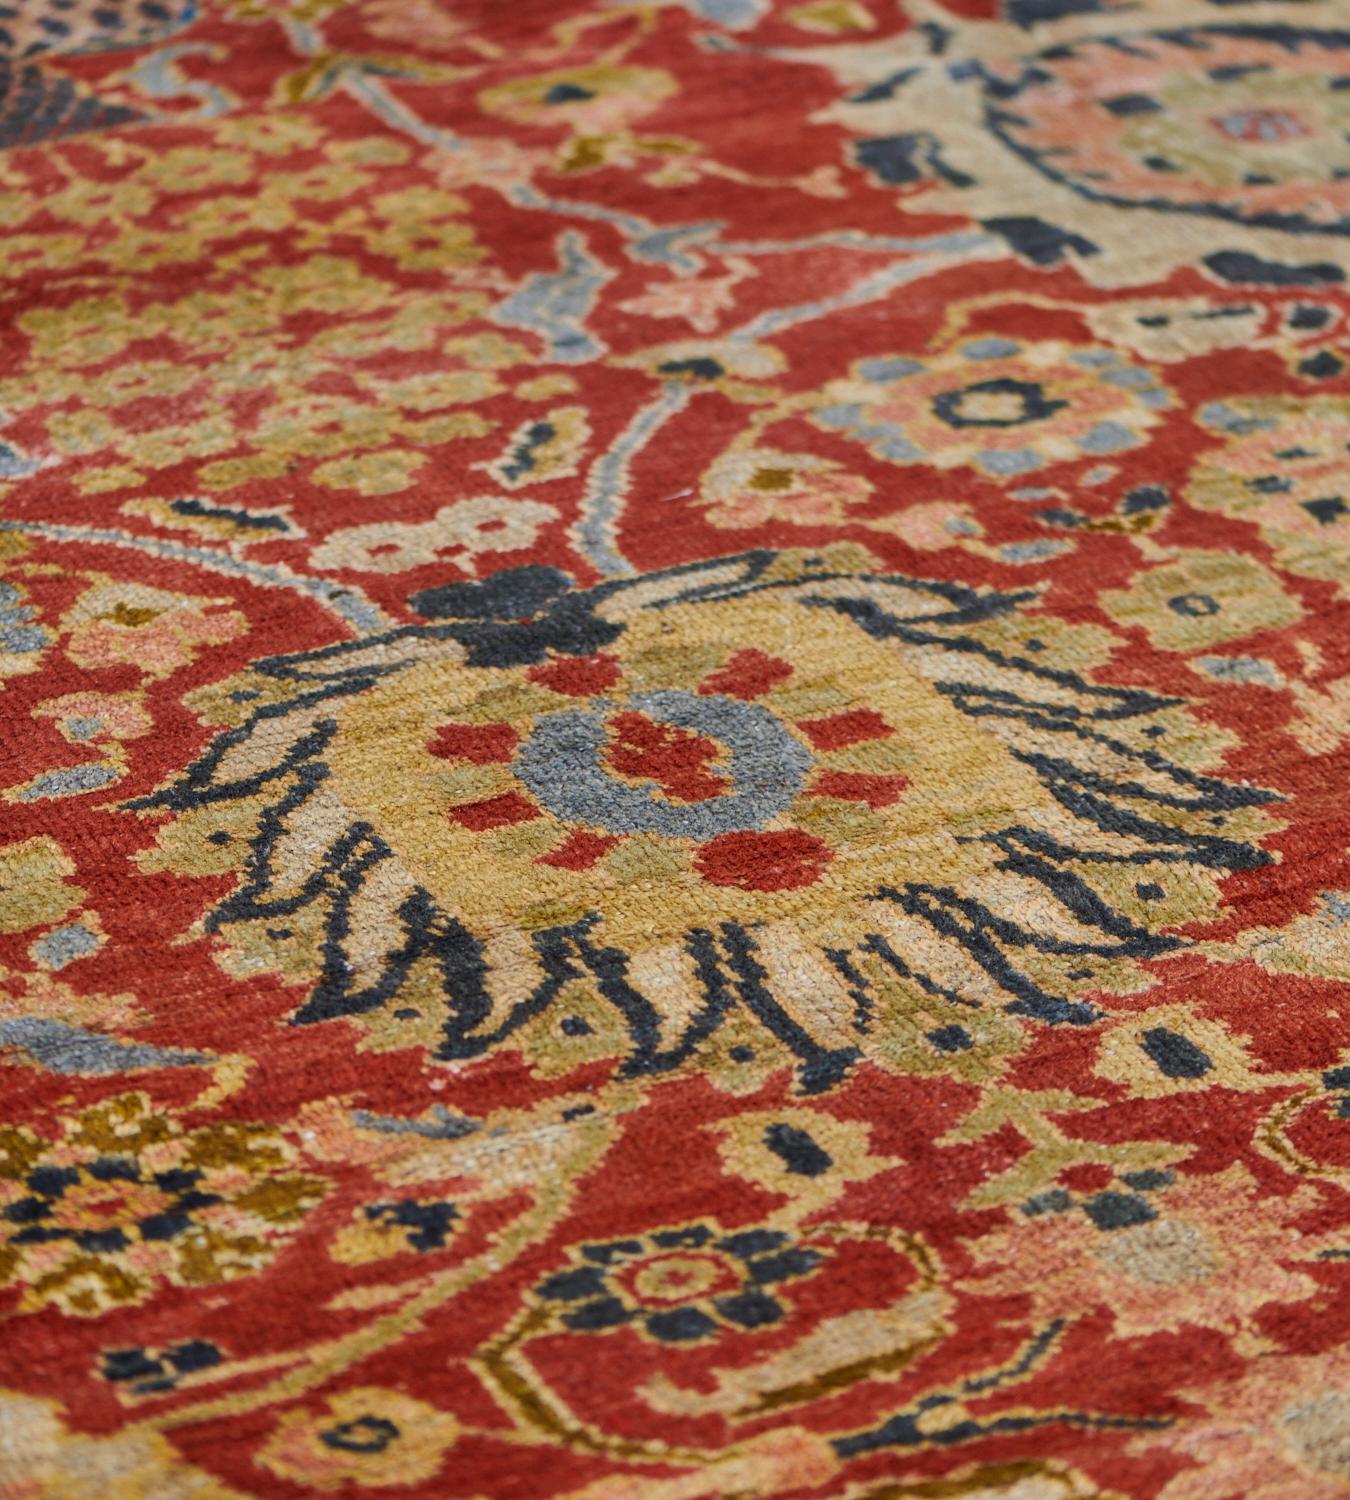 This antique Ziegler Sultanabad rug has a red field with a flowering vase and bold palmettes at each end with vertical rows at each side of bold polychrome palmettes linked by dense polychrome floral and leafy vine, in a broad indigo-blue border of